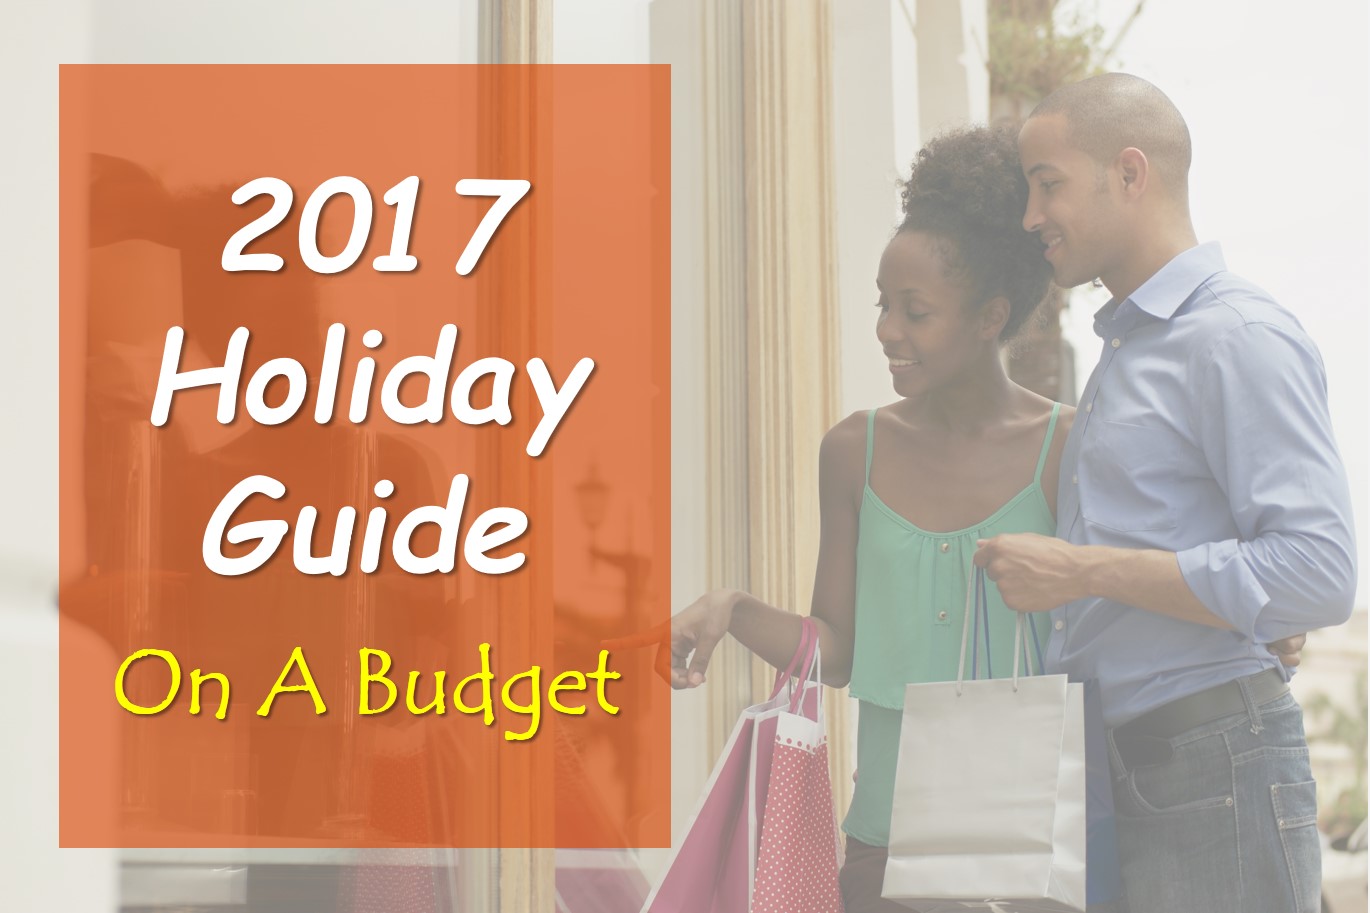 2017 Holiday Guide on a Budget